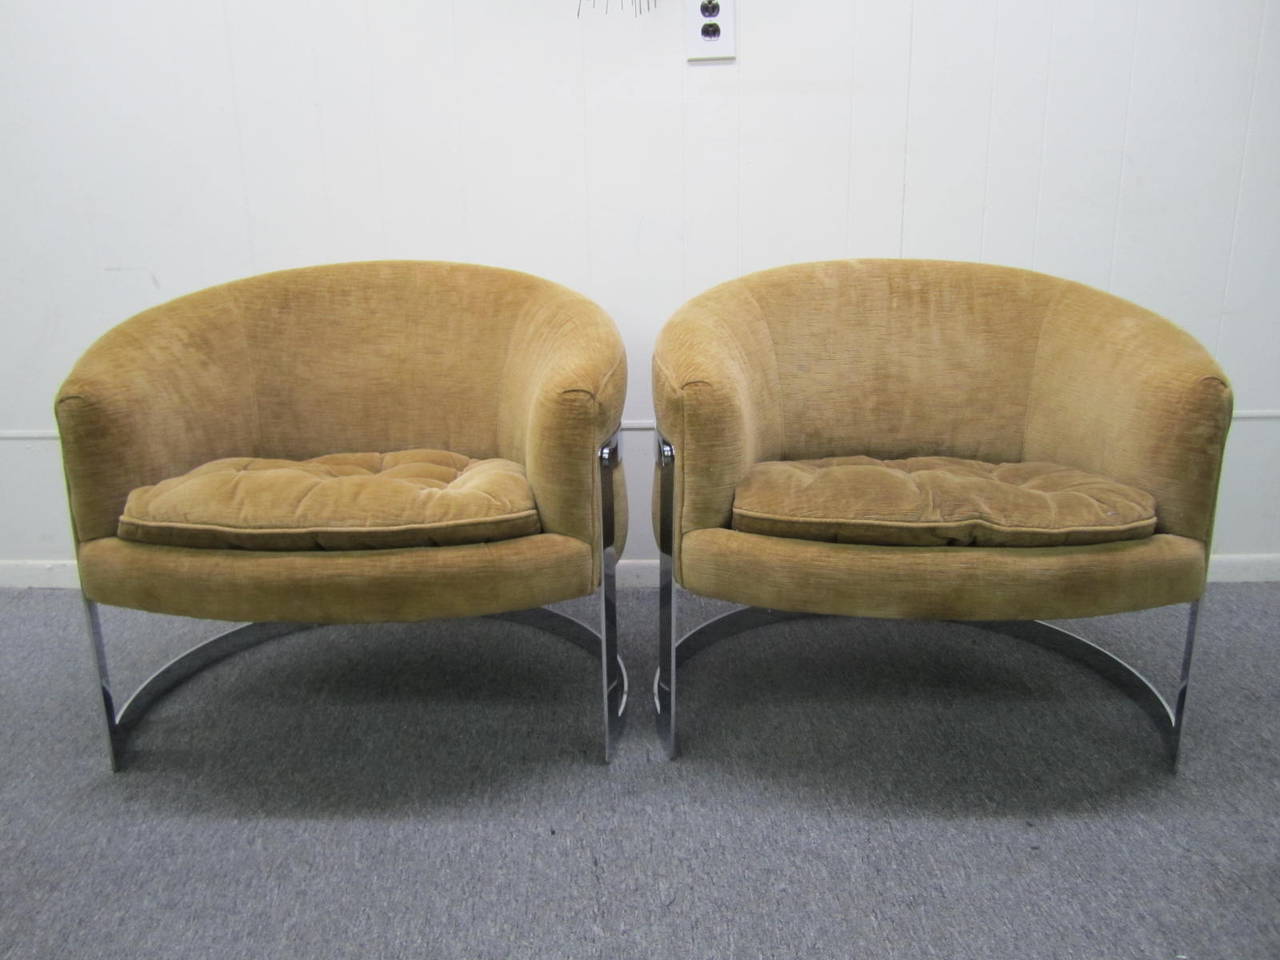 Pair of Barrel Back Chrome Lounge Chairs, Mid-Century Modern For Sale 2